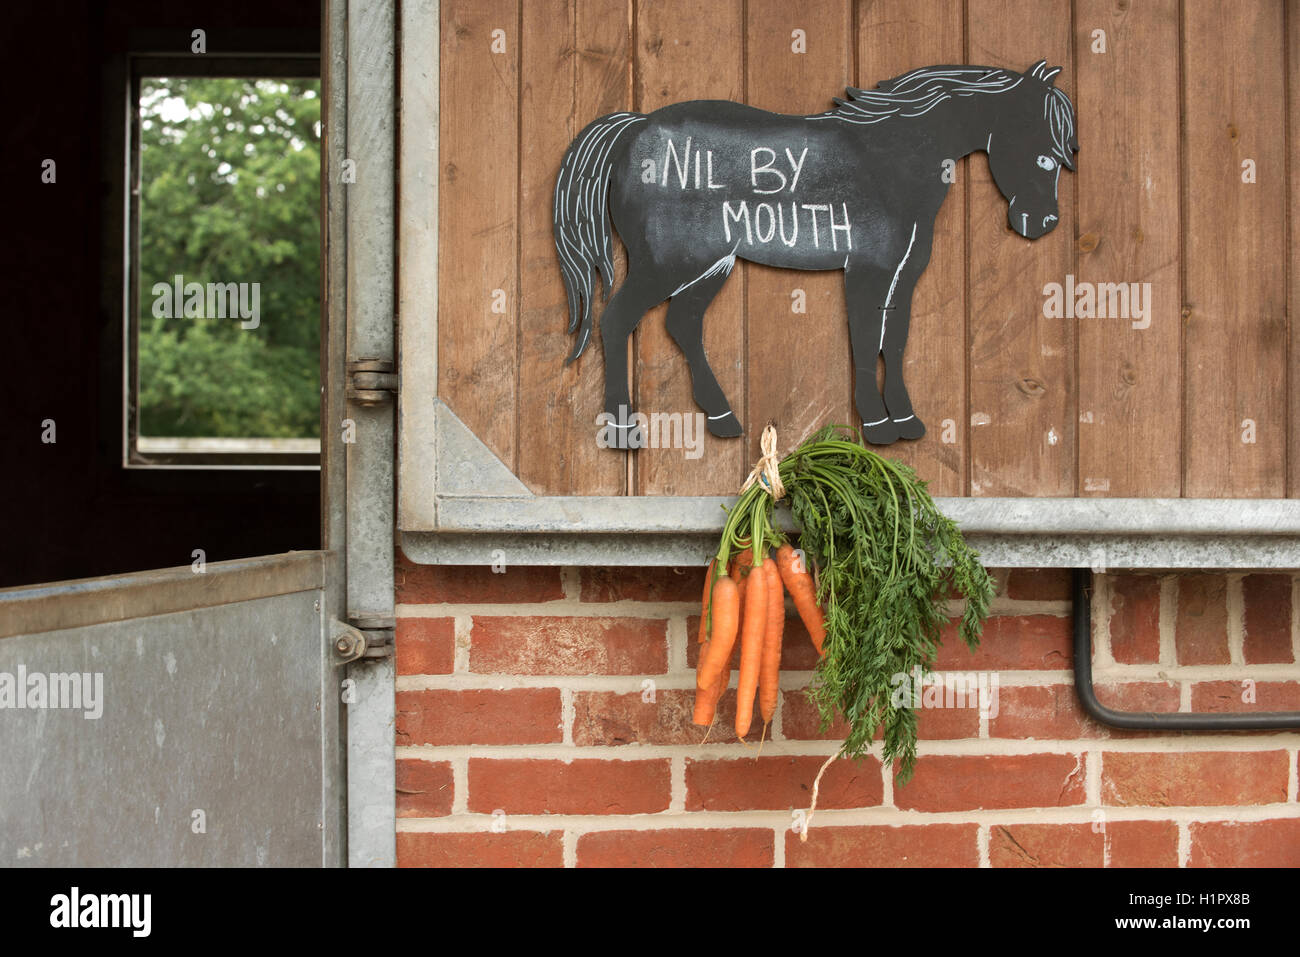 Notice on a stable door with a bunch of carrots. Nil by mouth written on a chalk board of a horse's stable Stock Photo